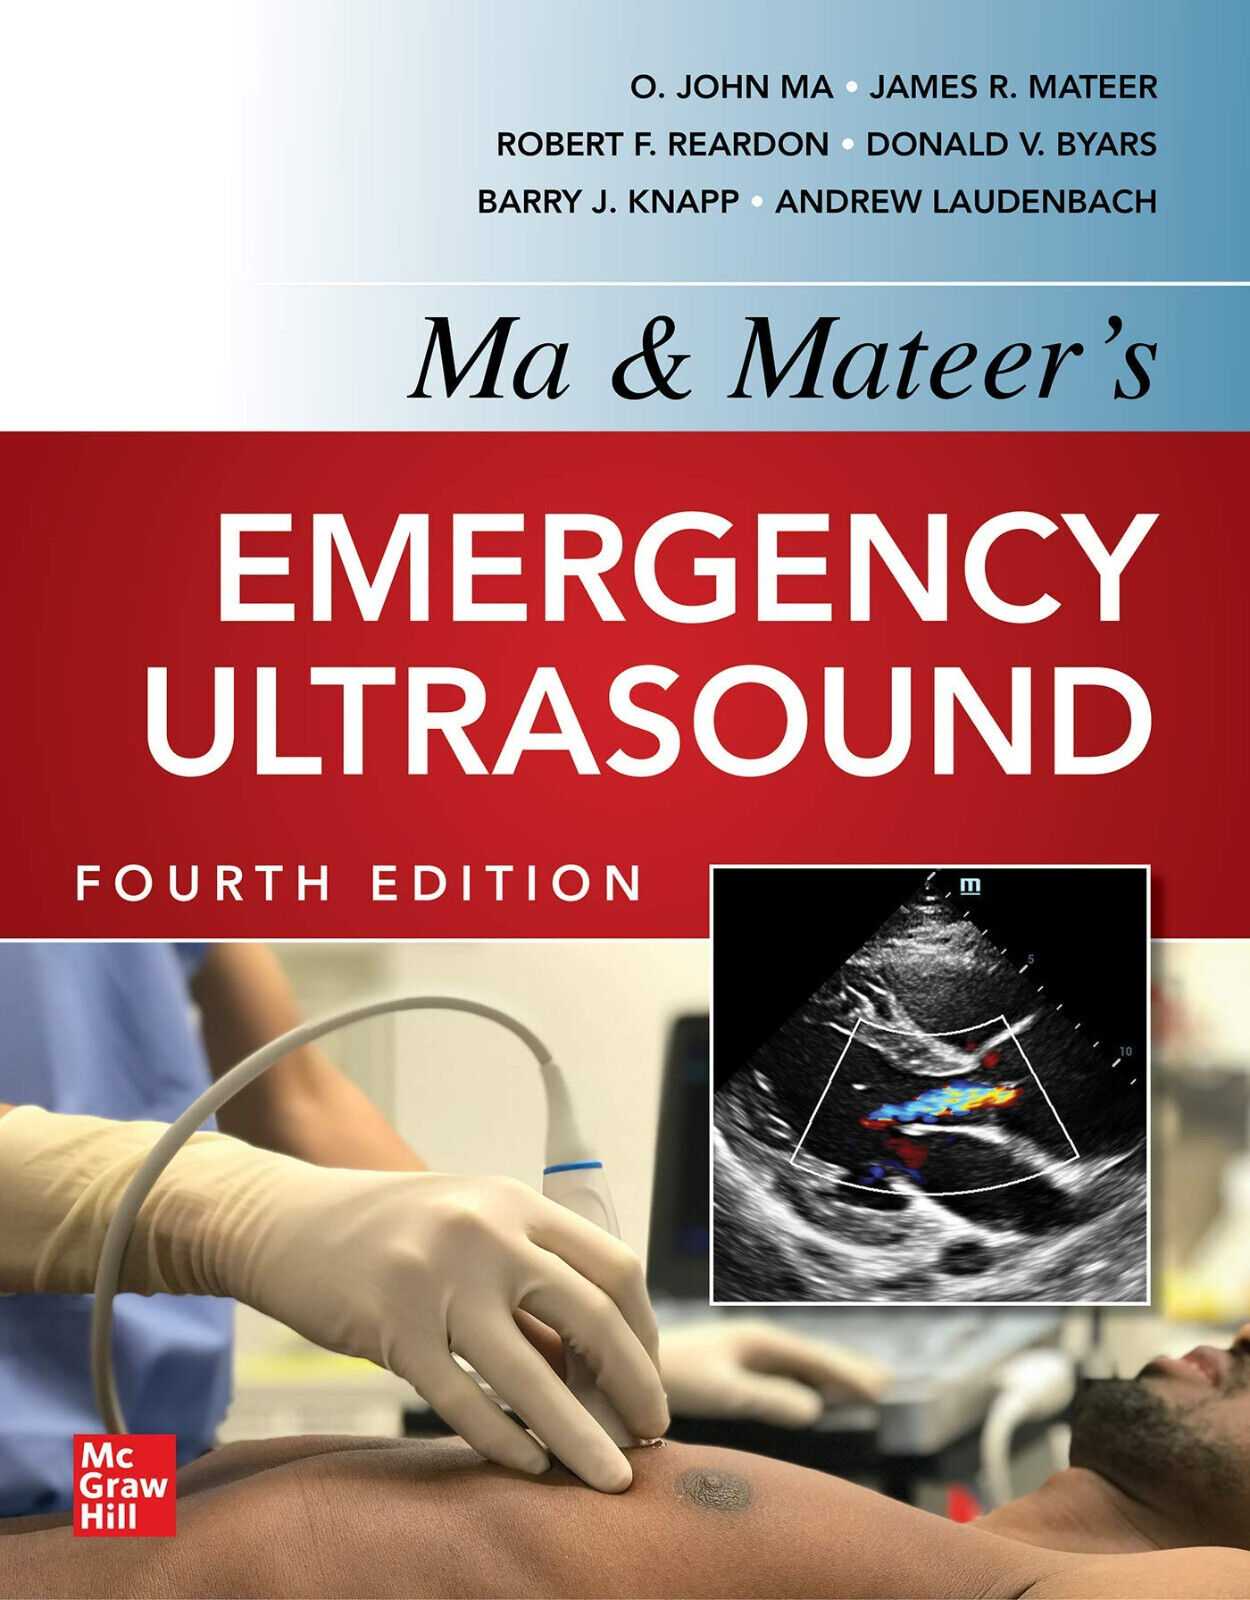 Ma and Mateers Emergency Ultrasound - Mcgraw-hill Education - 2020